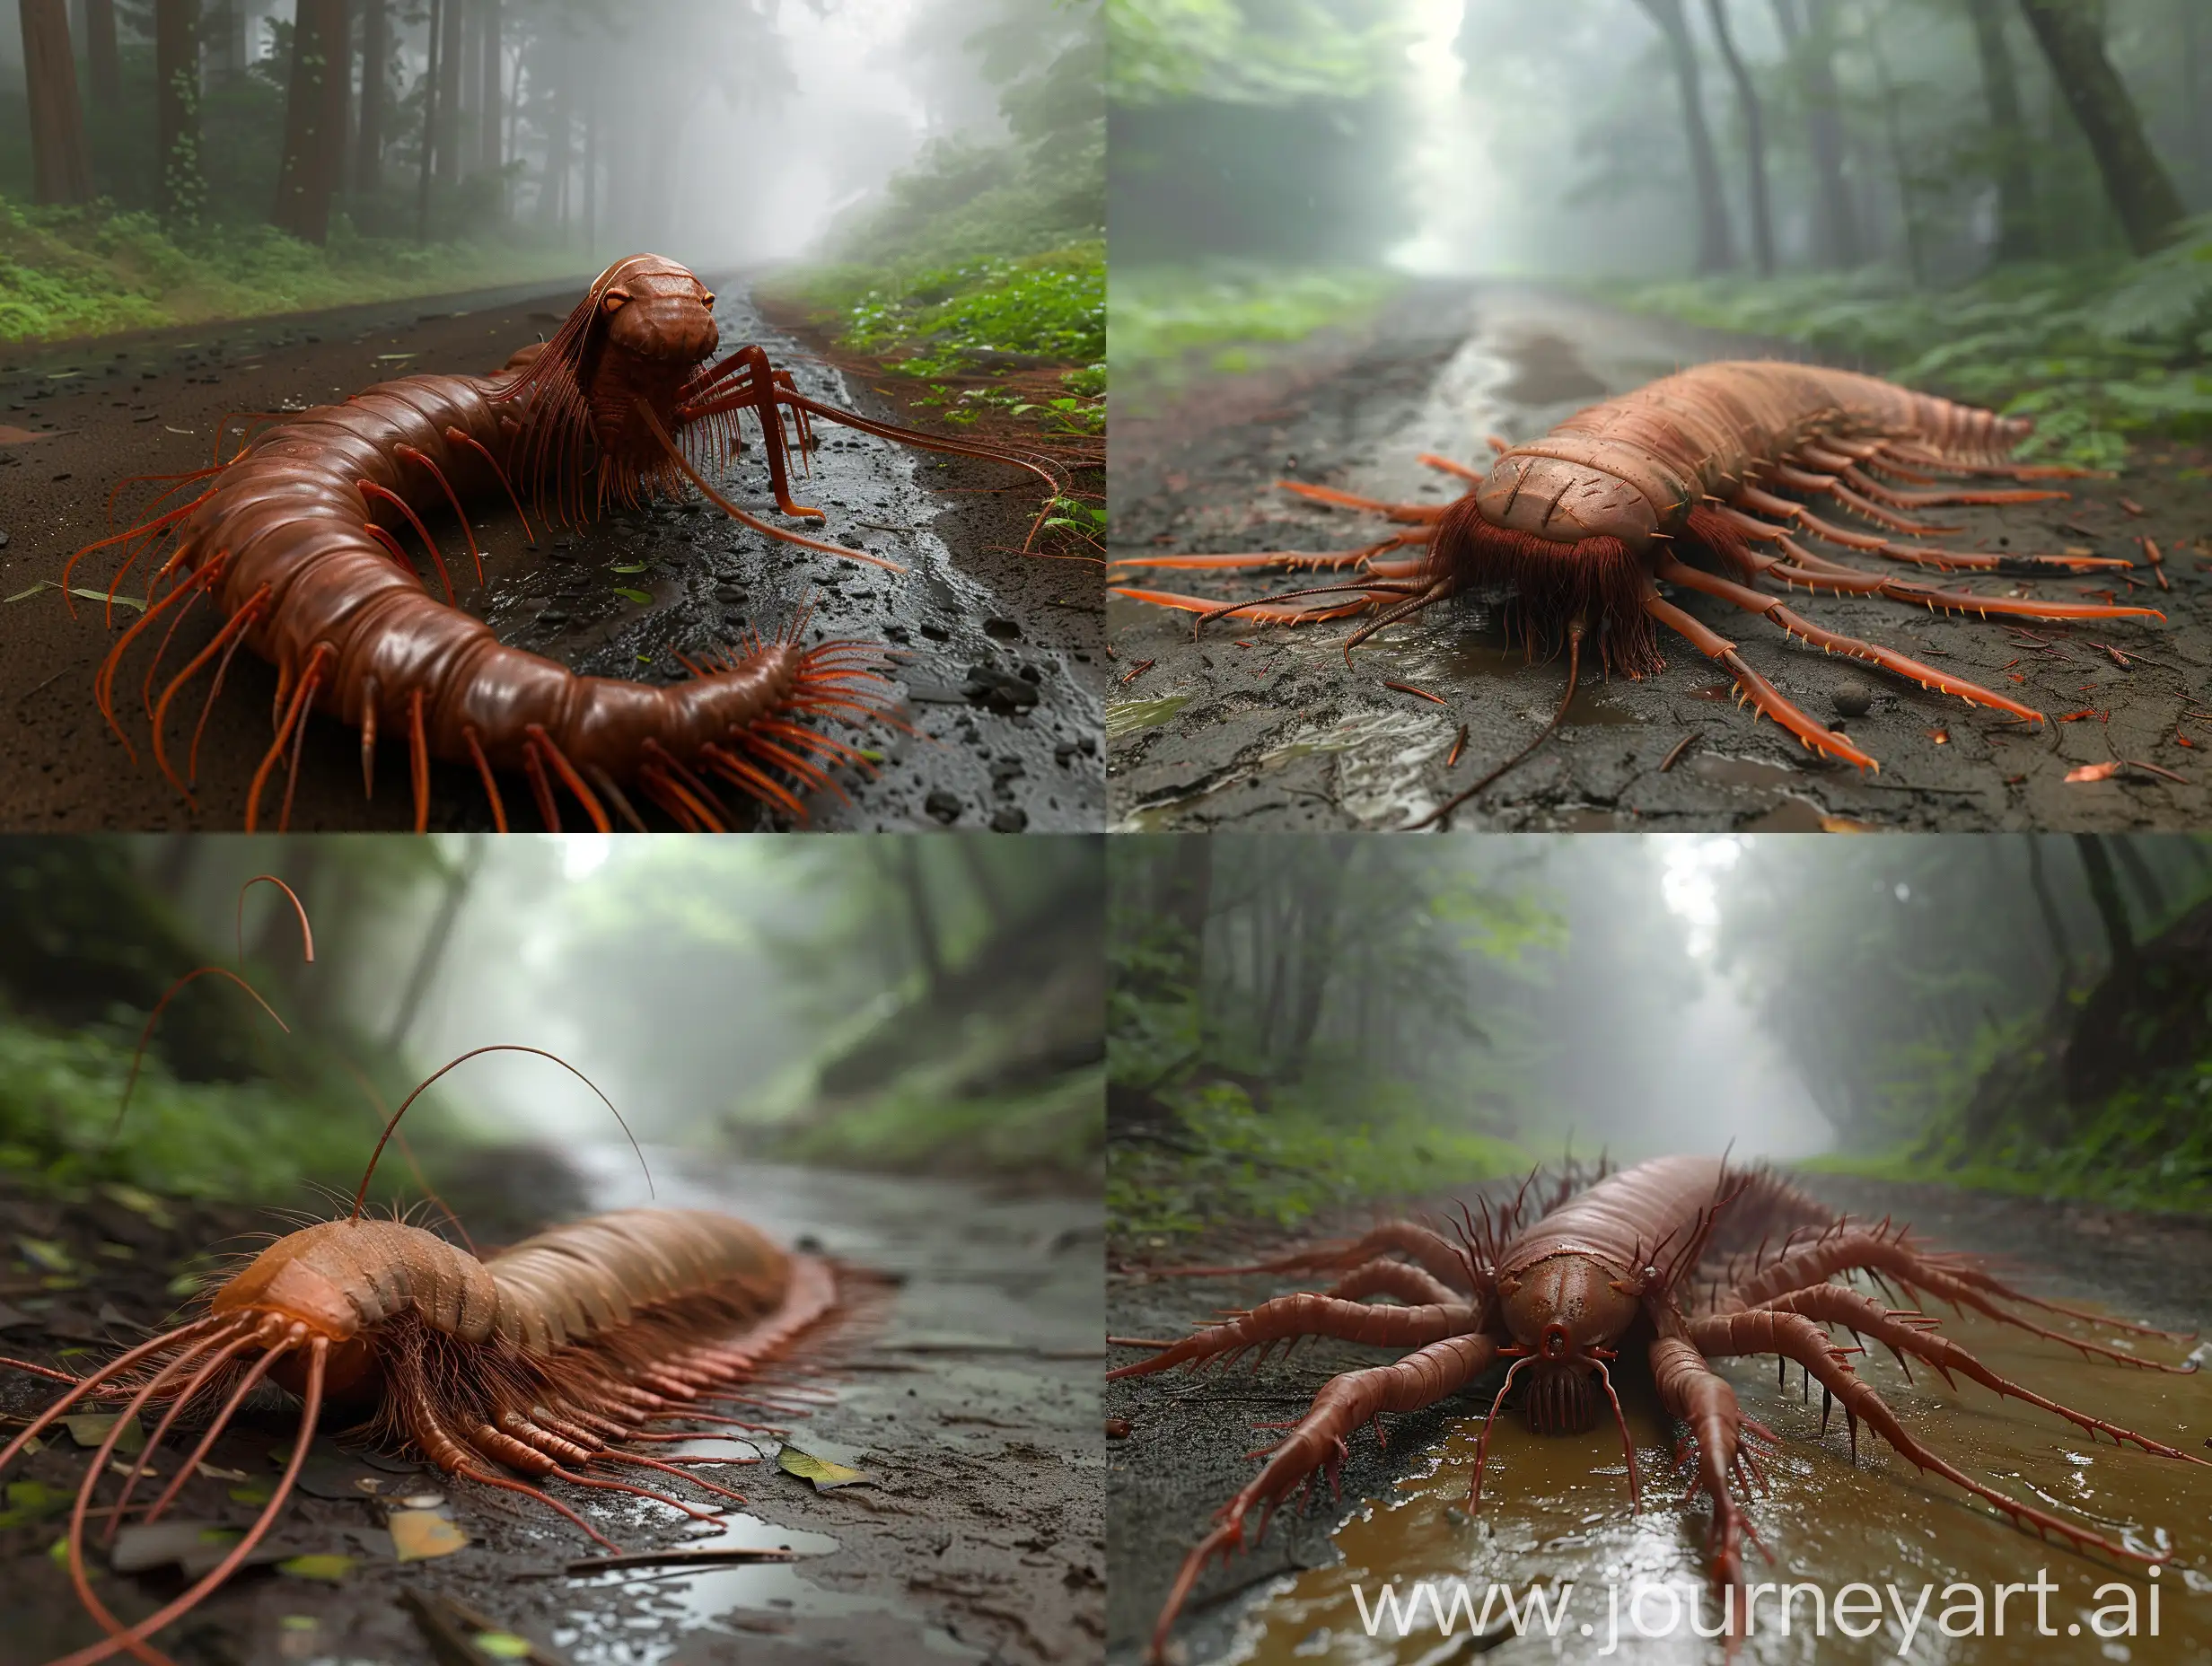 Giant-KabukiFaced-Centipede-in-Tokyo-Forest-Mysterious-Fantasy-Scene